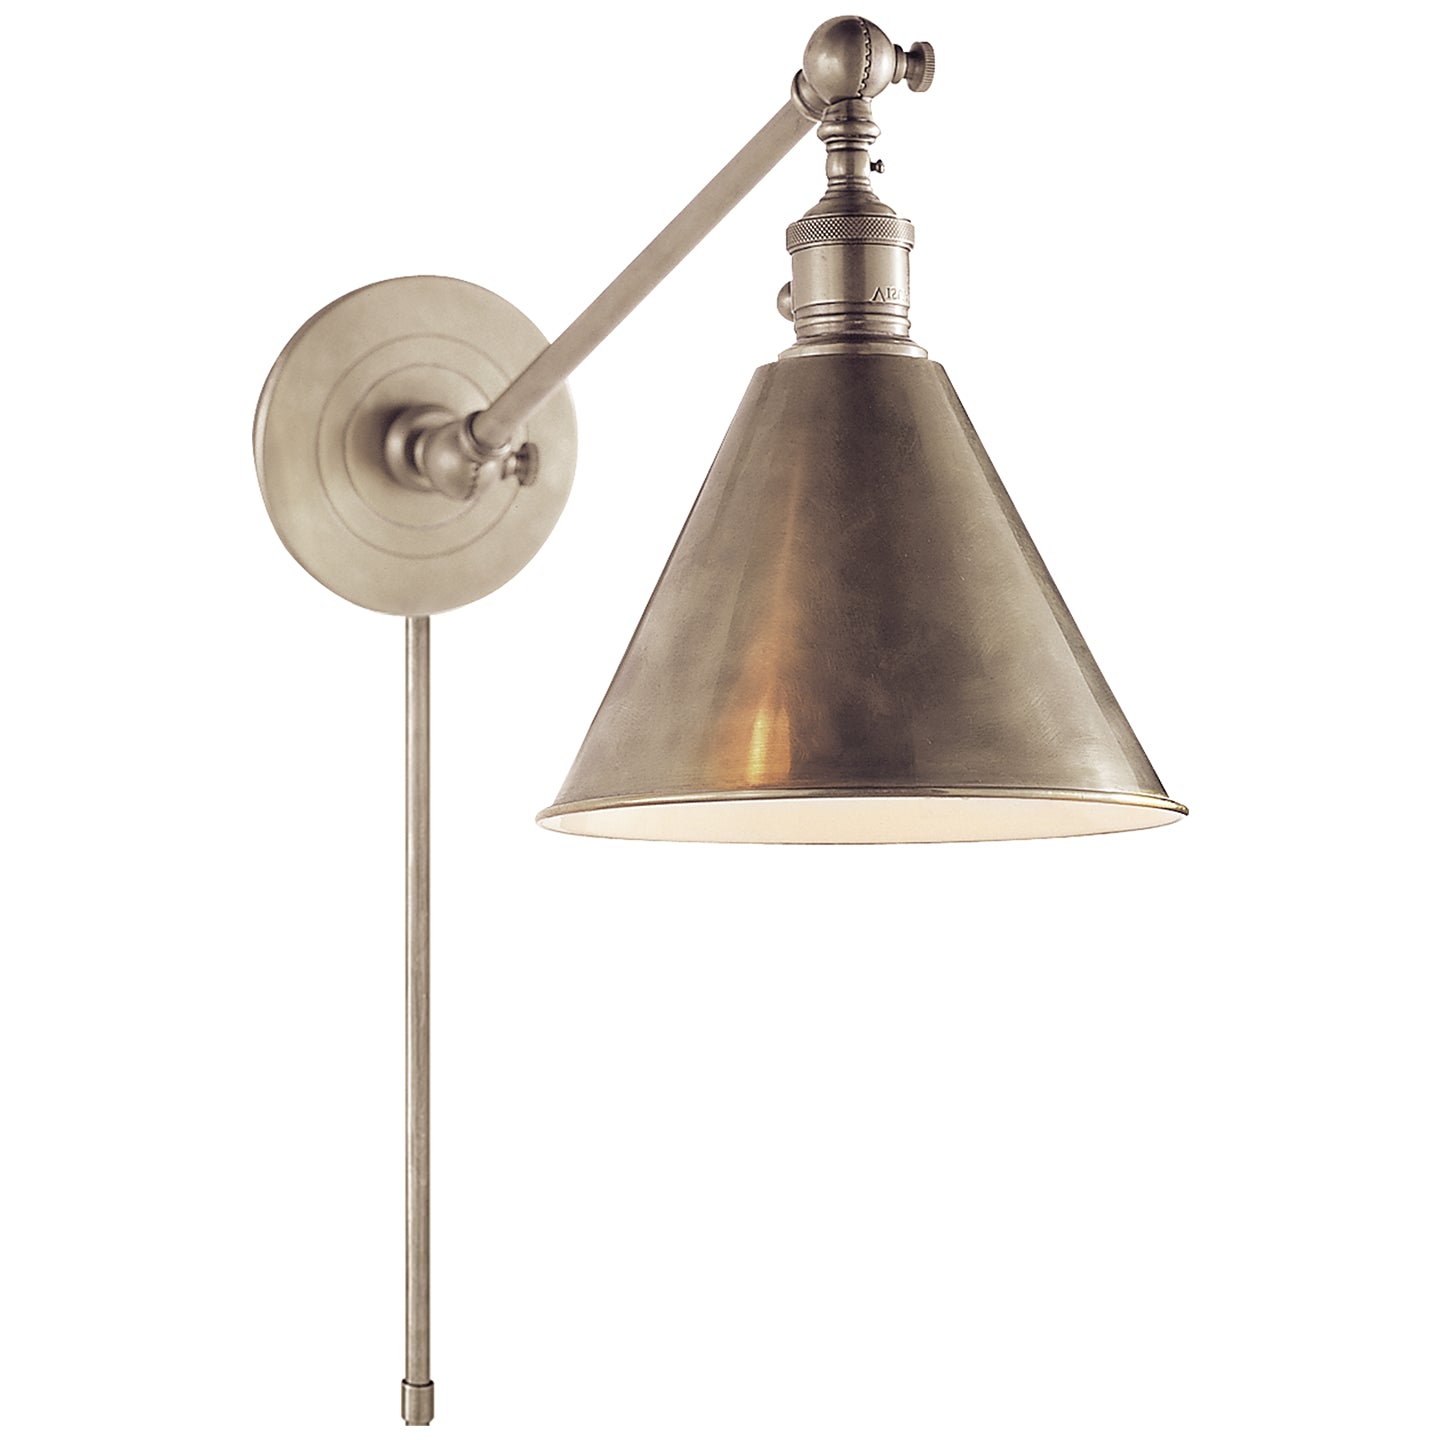 Visual Comfort Signature - SL 2922AN - One Light Wall Sconce - Boston Functional - Antique Nickel